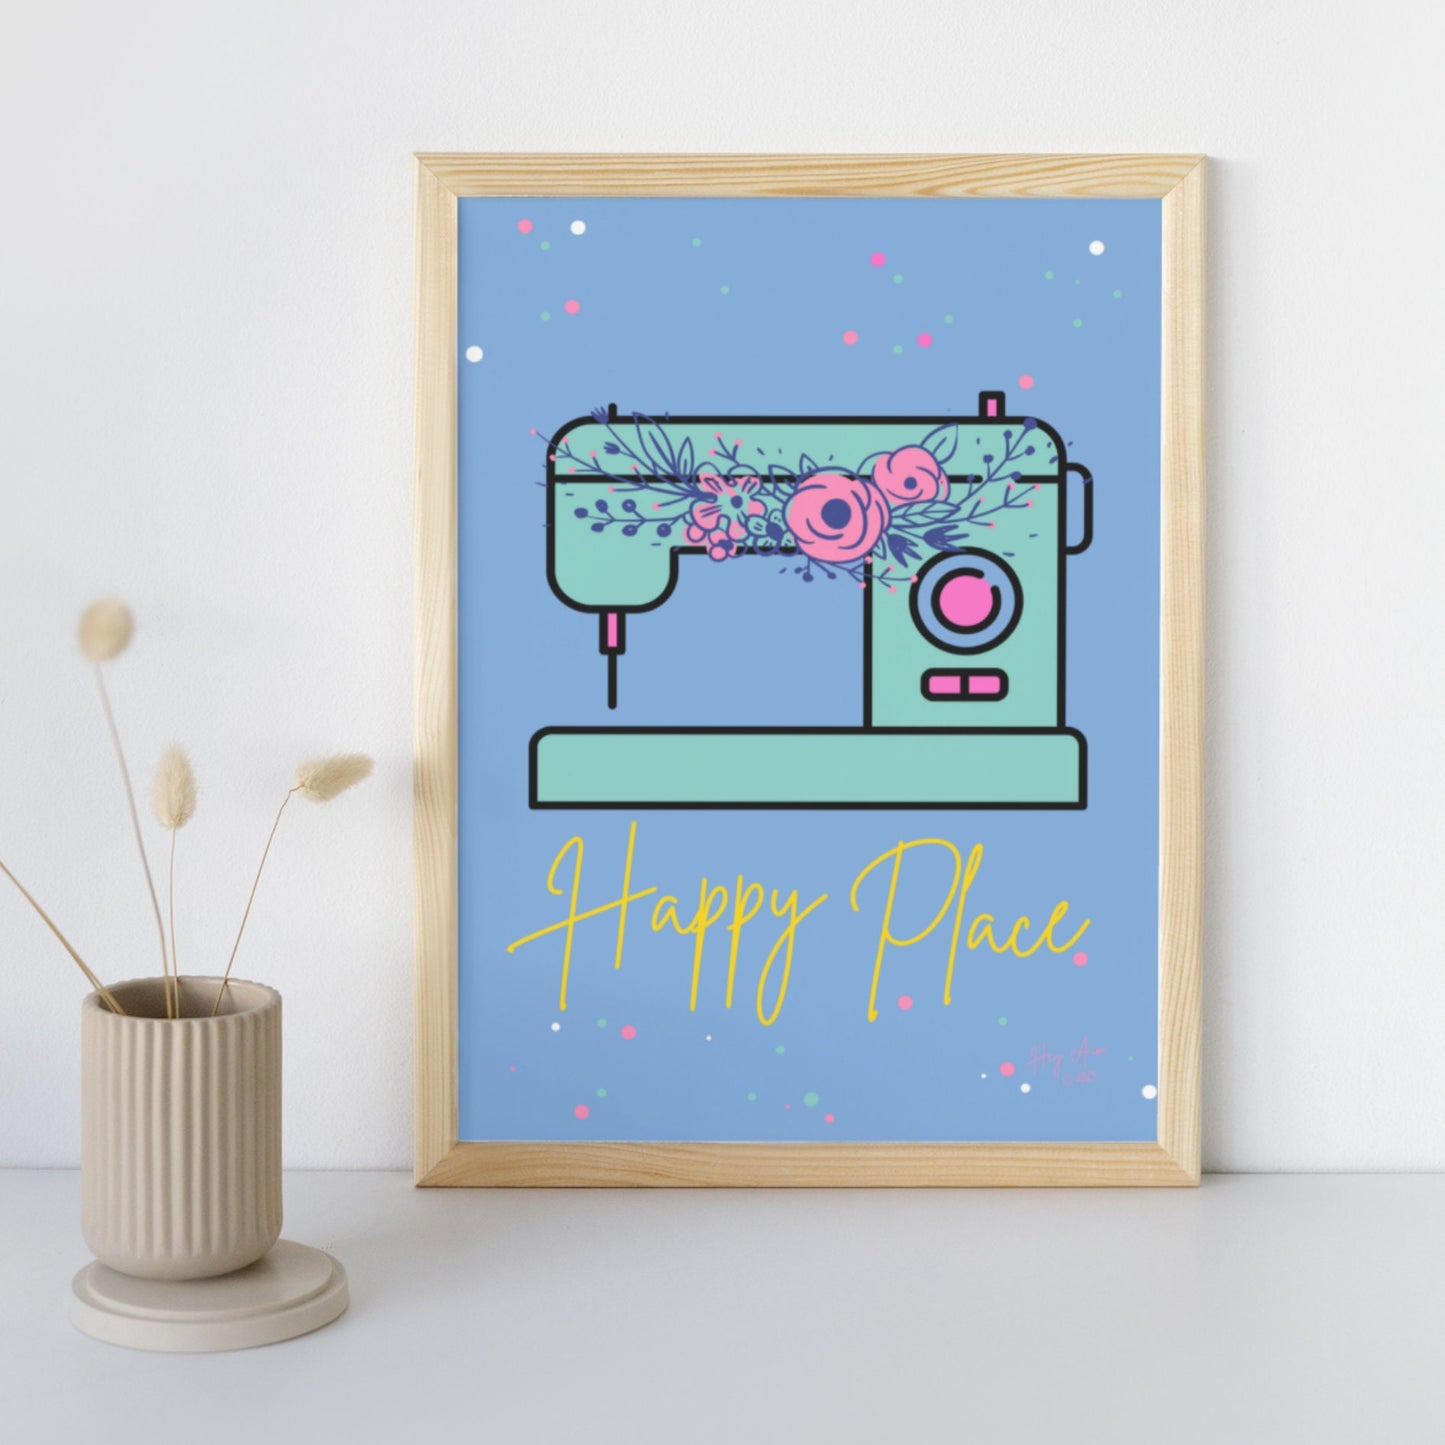 Happy Place | Digital Wall Art | Download Only | A3, A4, A5, A6 Sizes